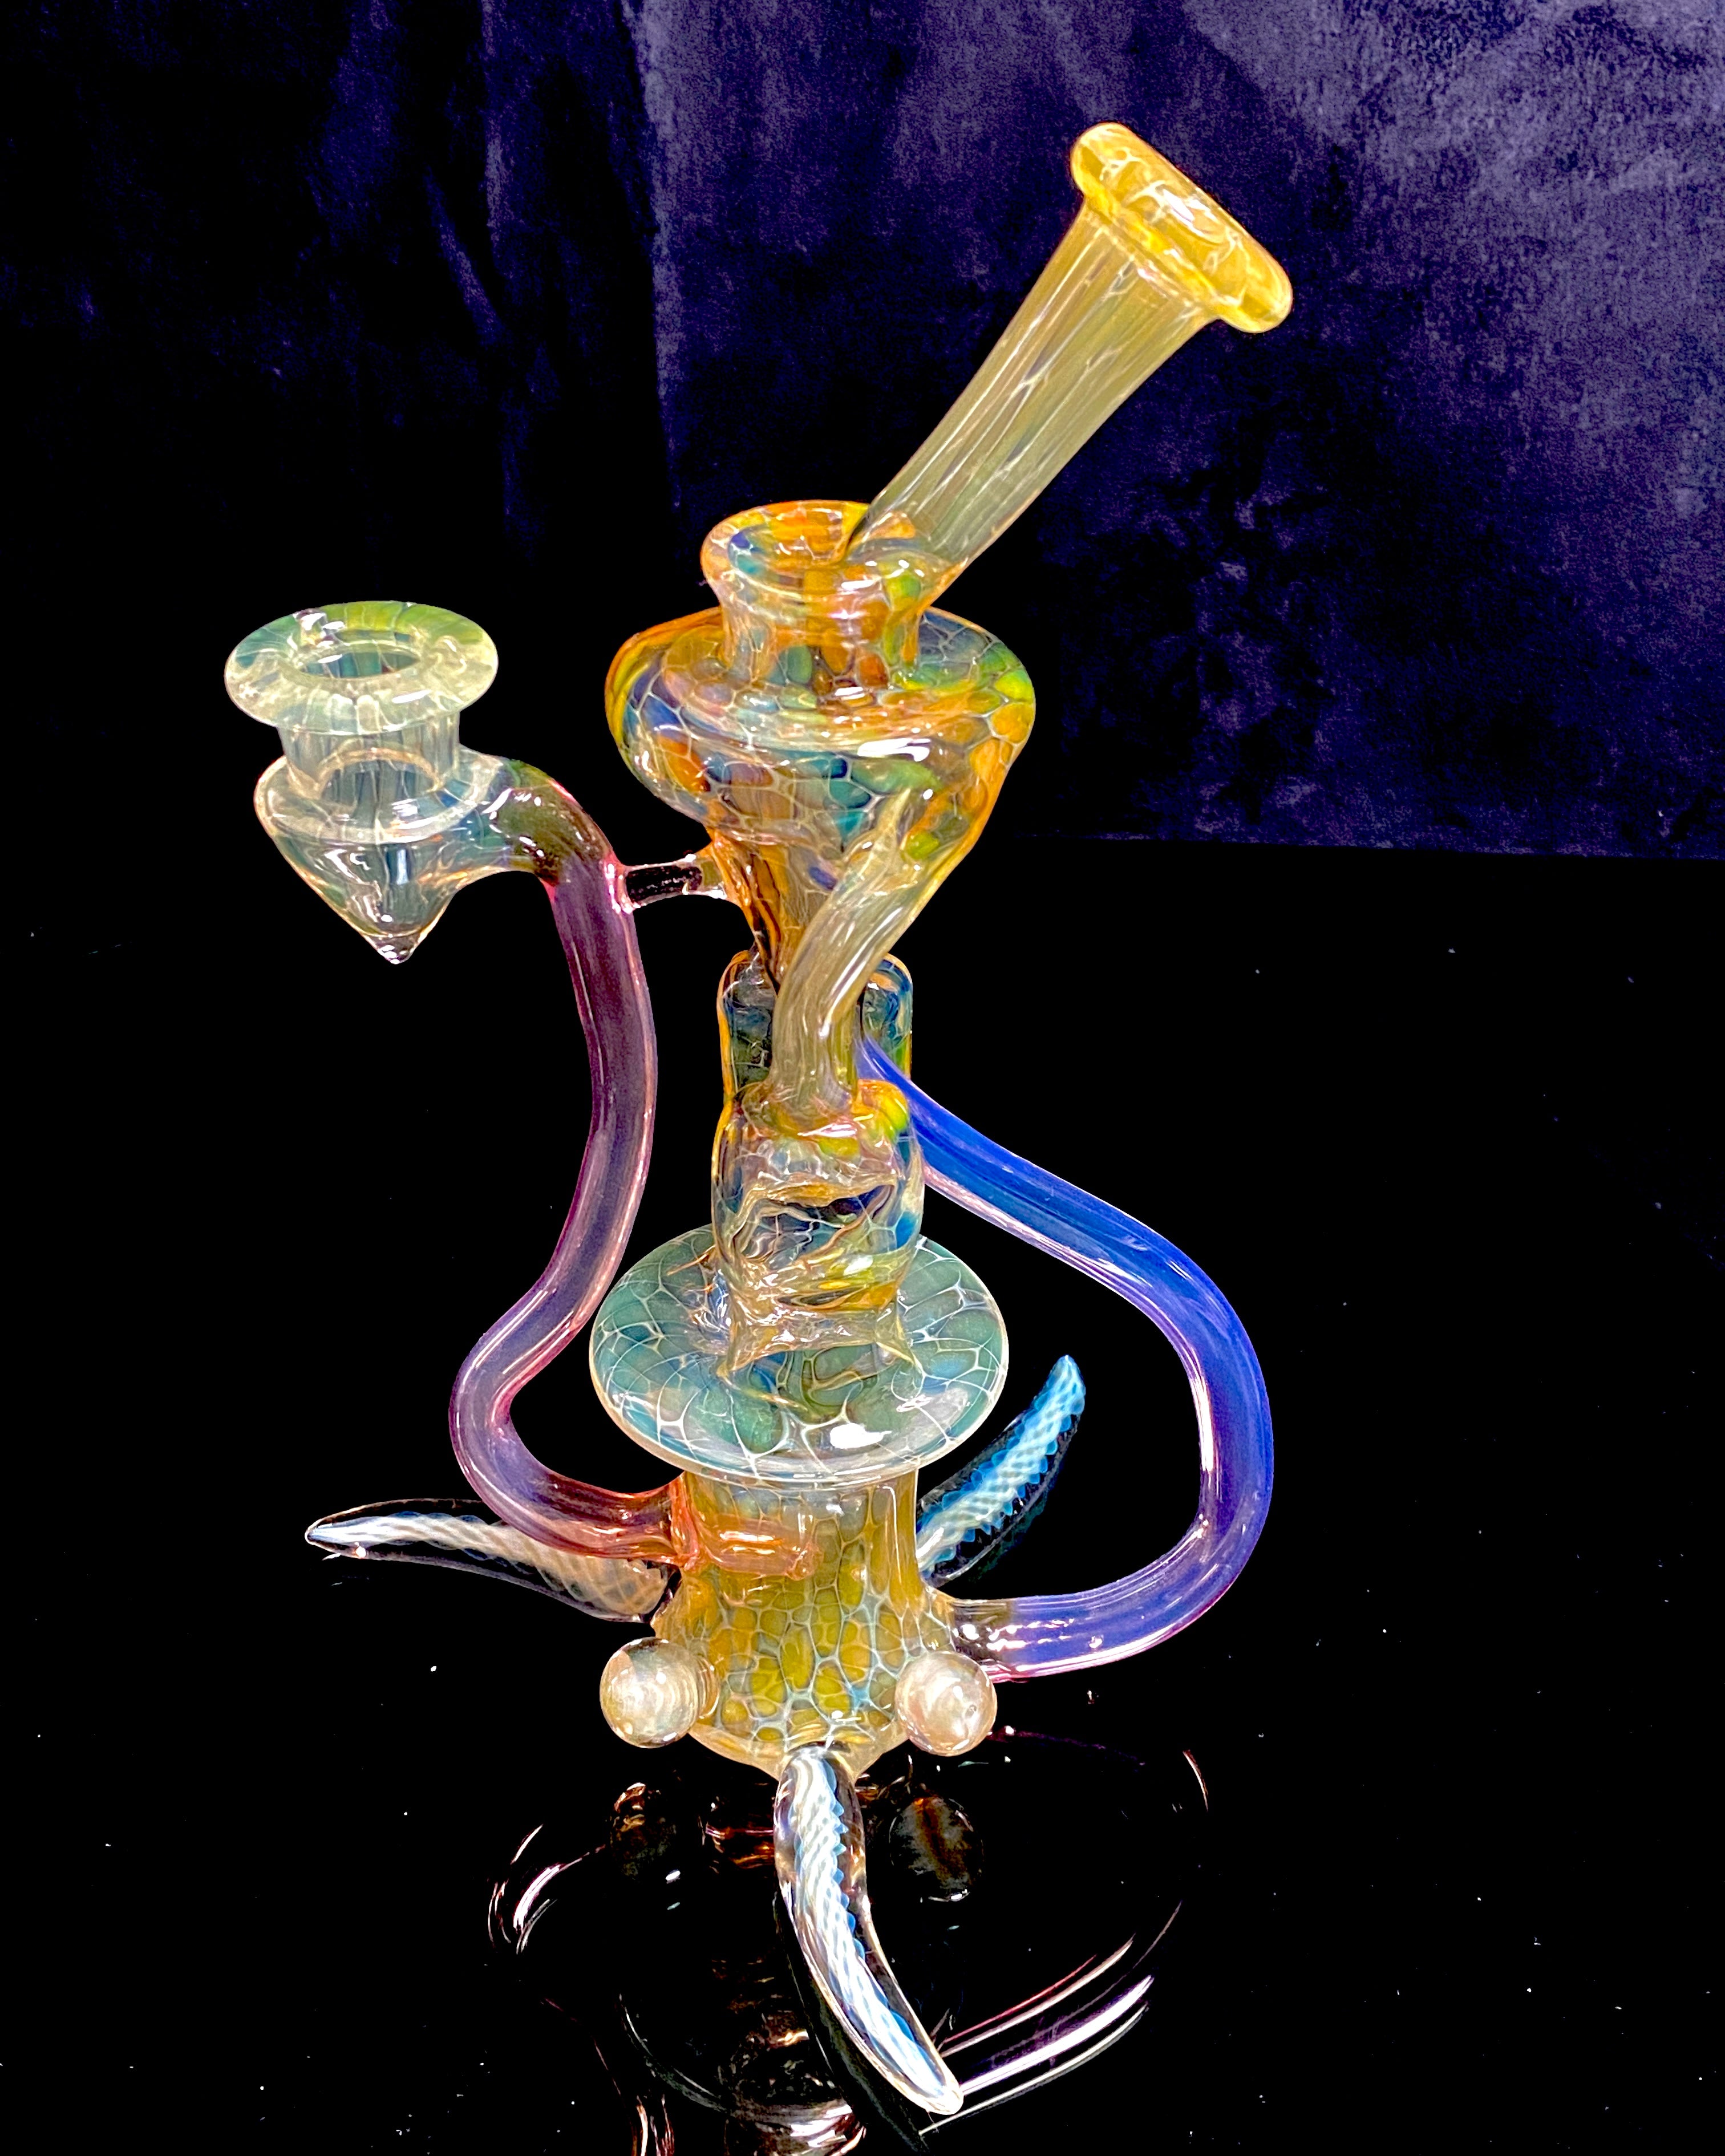 Jakers x Asthmatic Glasstastic Collab Fully Fumed Rig - TheSmokeyMcPotz Collection 